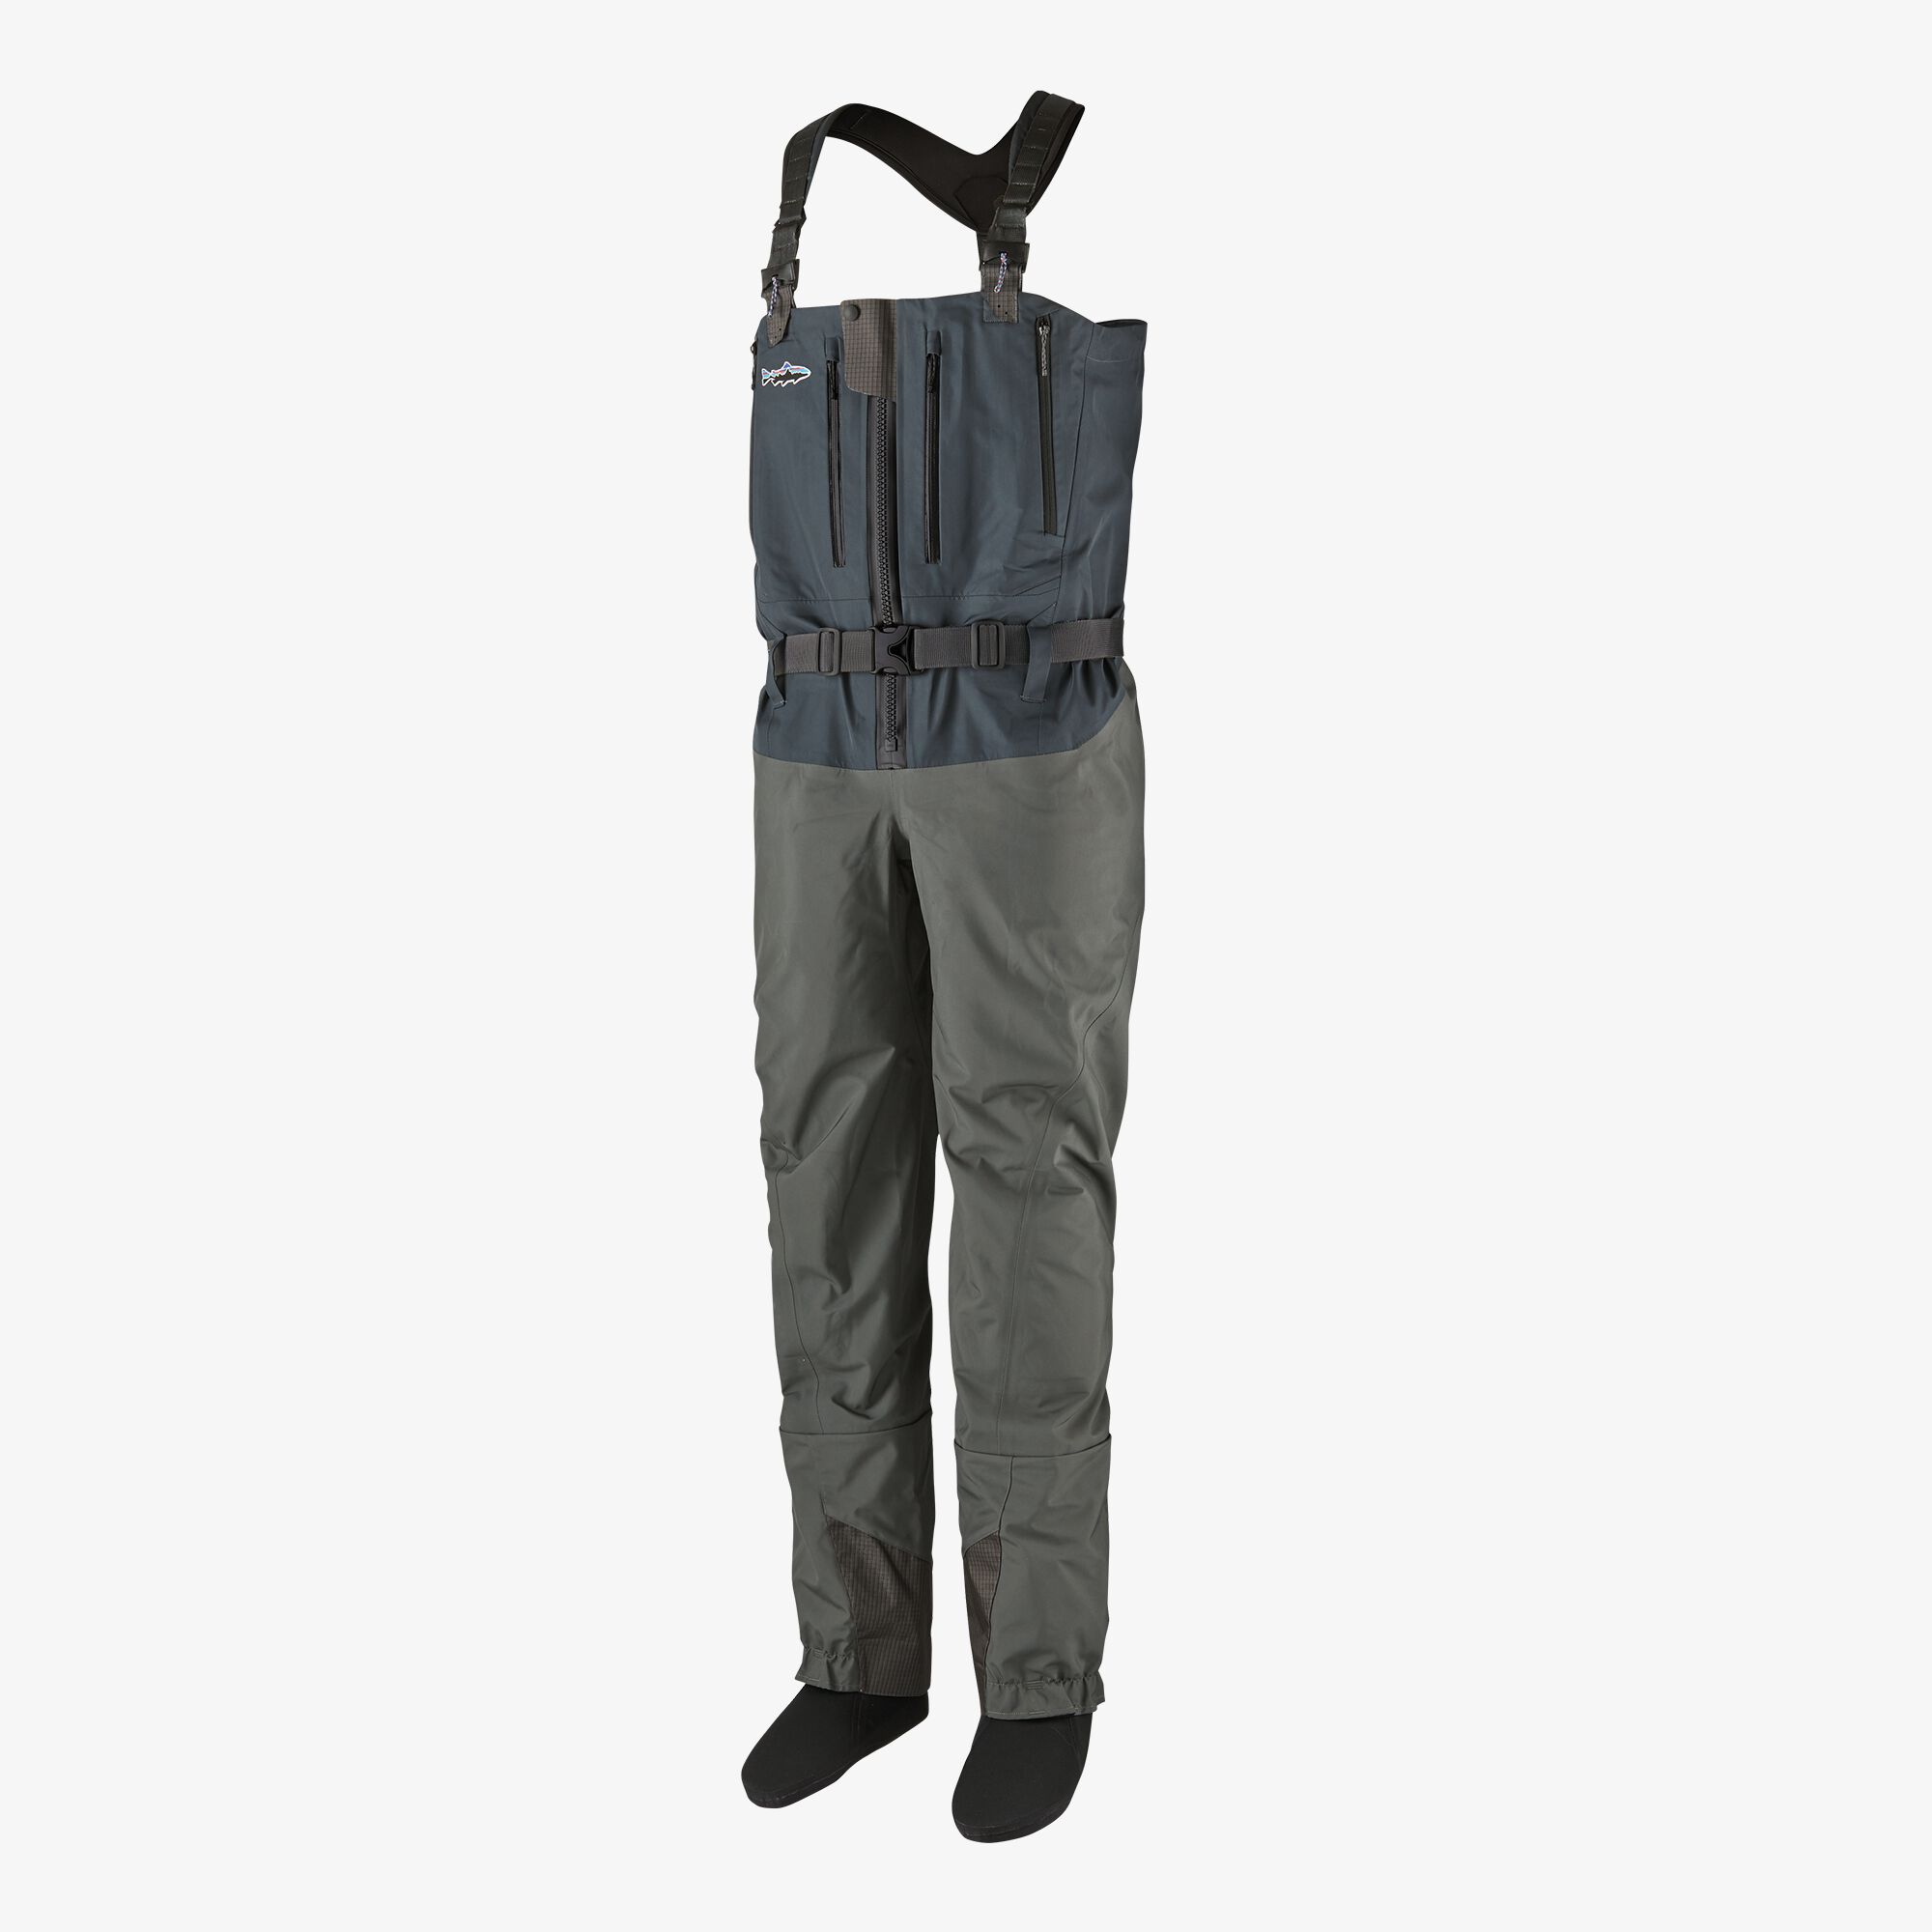 PATAGONIA SWIFTCURRENT EXPEDITION ZIP-FRONT WADER - FORGE GREY - XLL